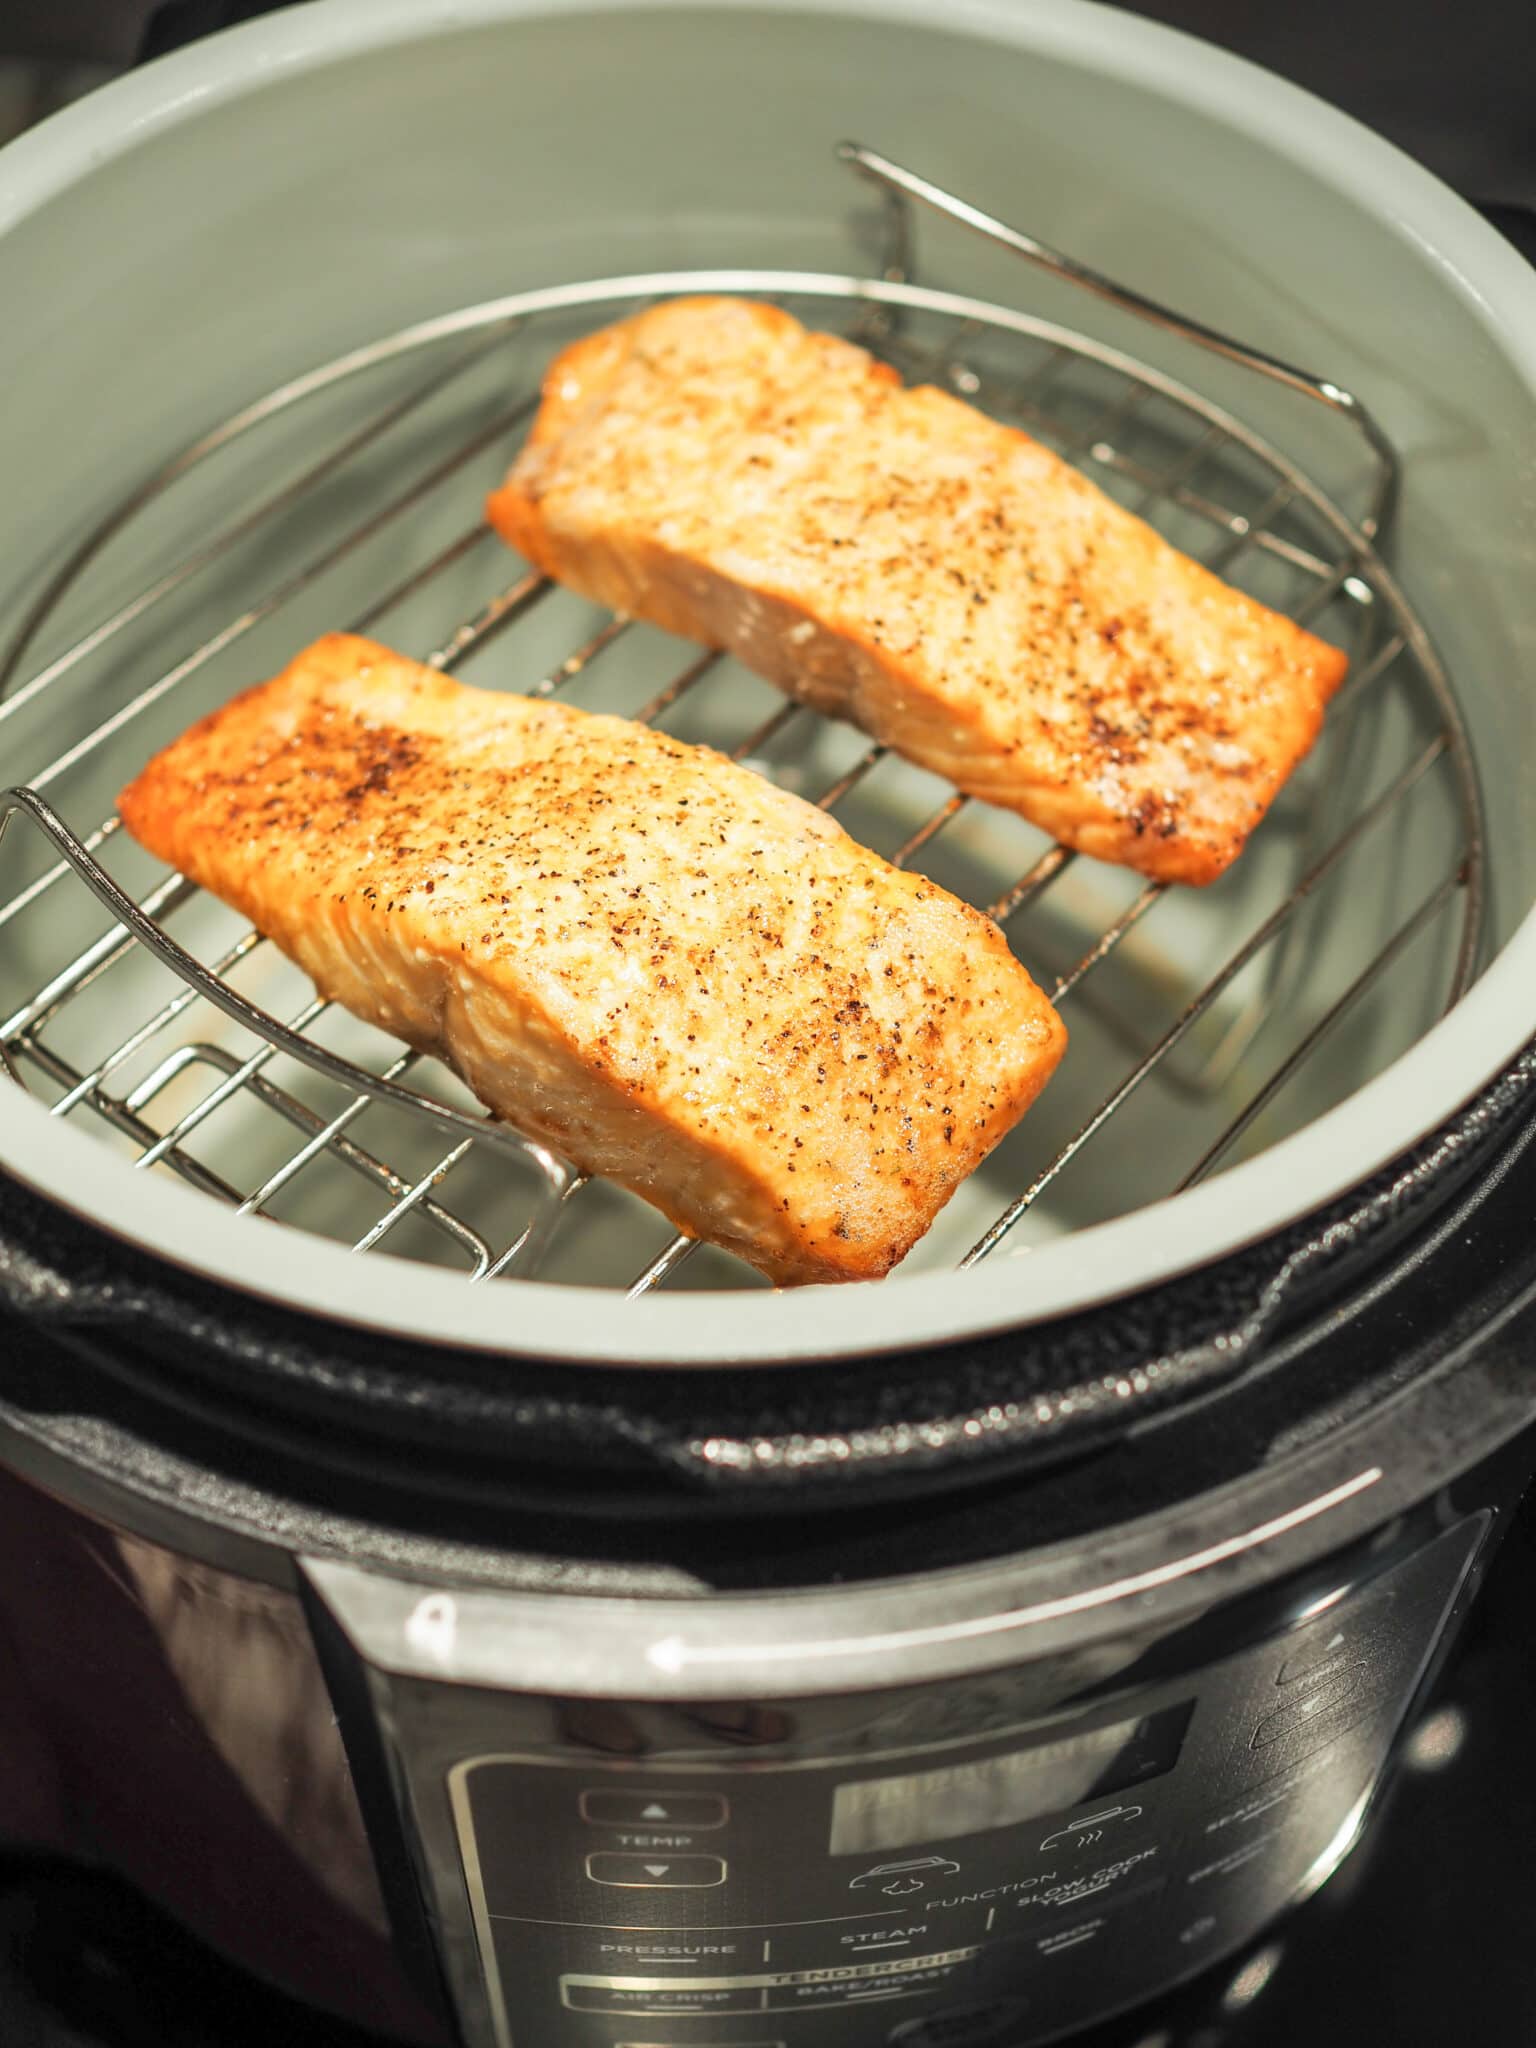 Easy and Healthy: How to Cook Salmon in Air Fryer